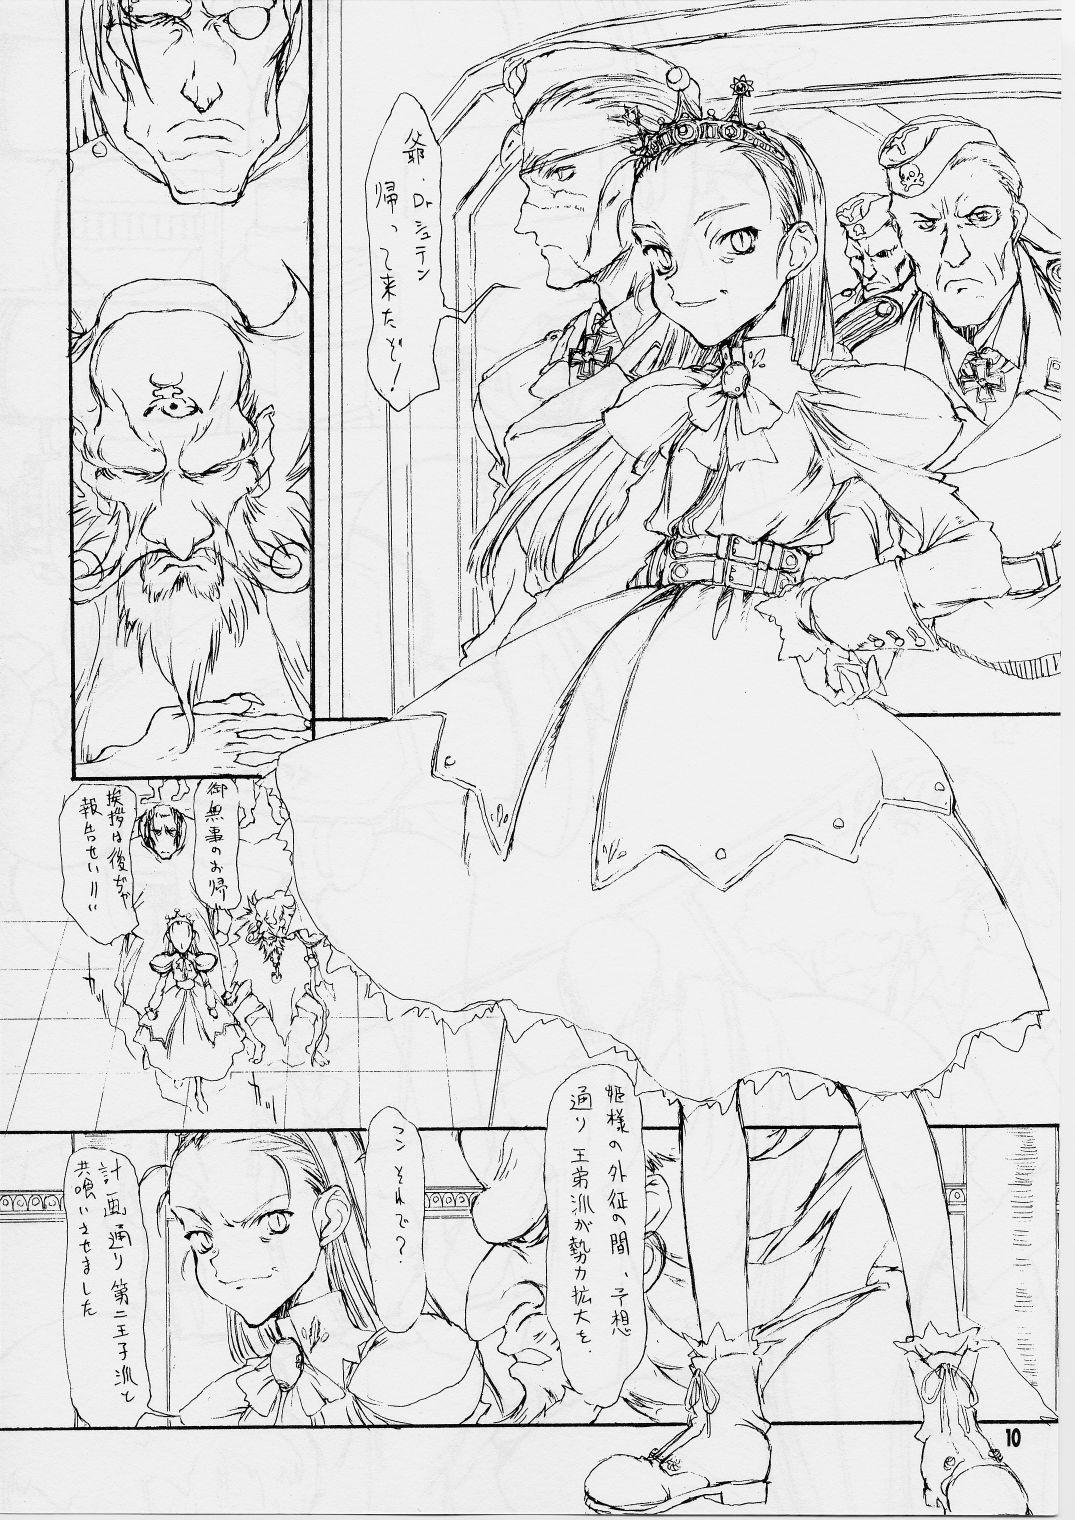 Massive The First Royal Princess Of Guards 5 - Cyberbots Sixtynine - Page 9